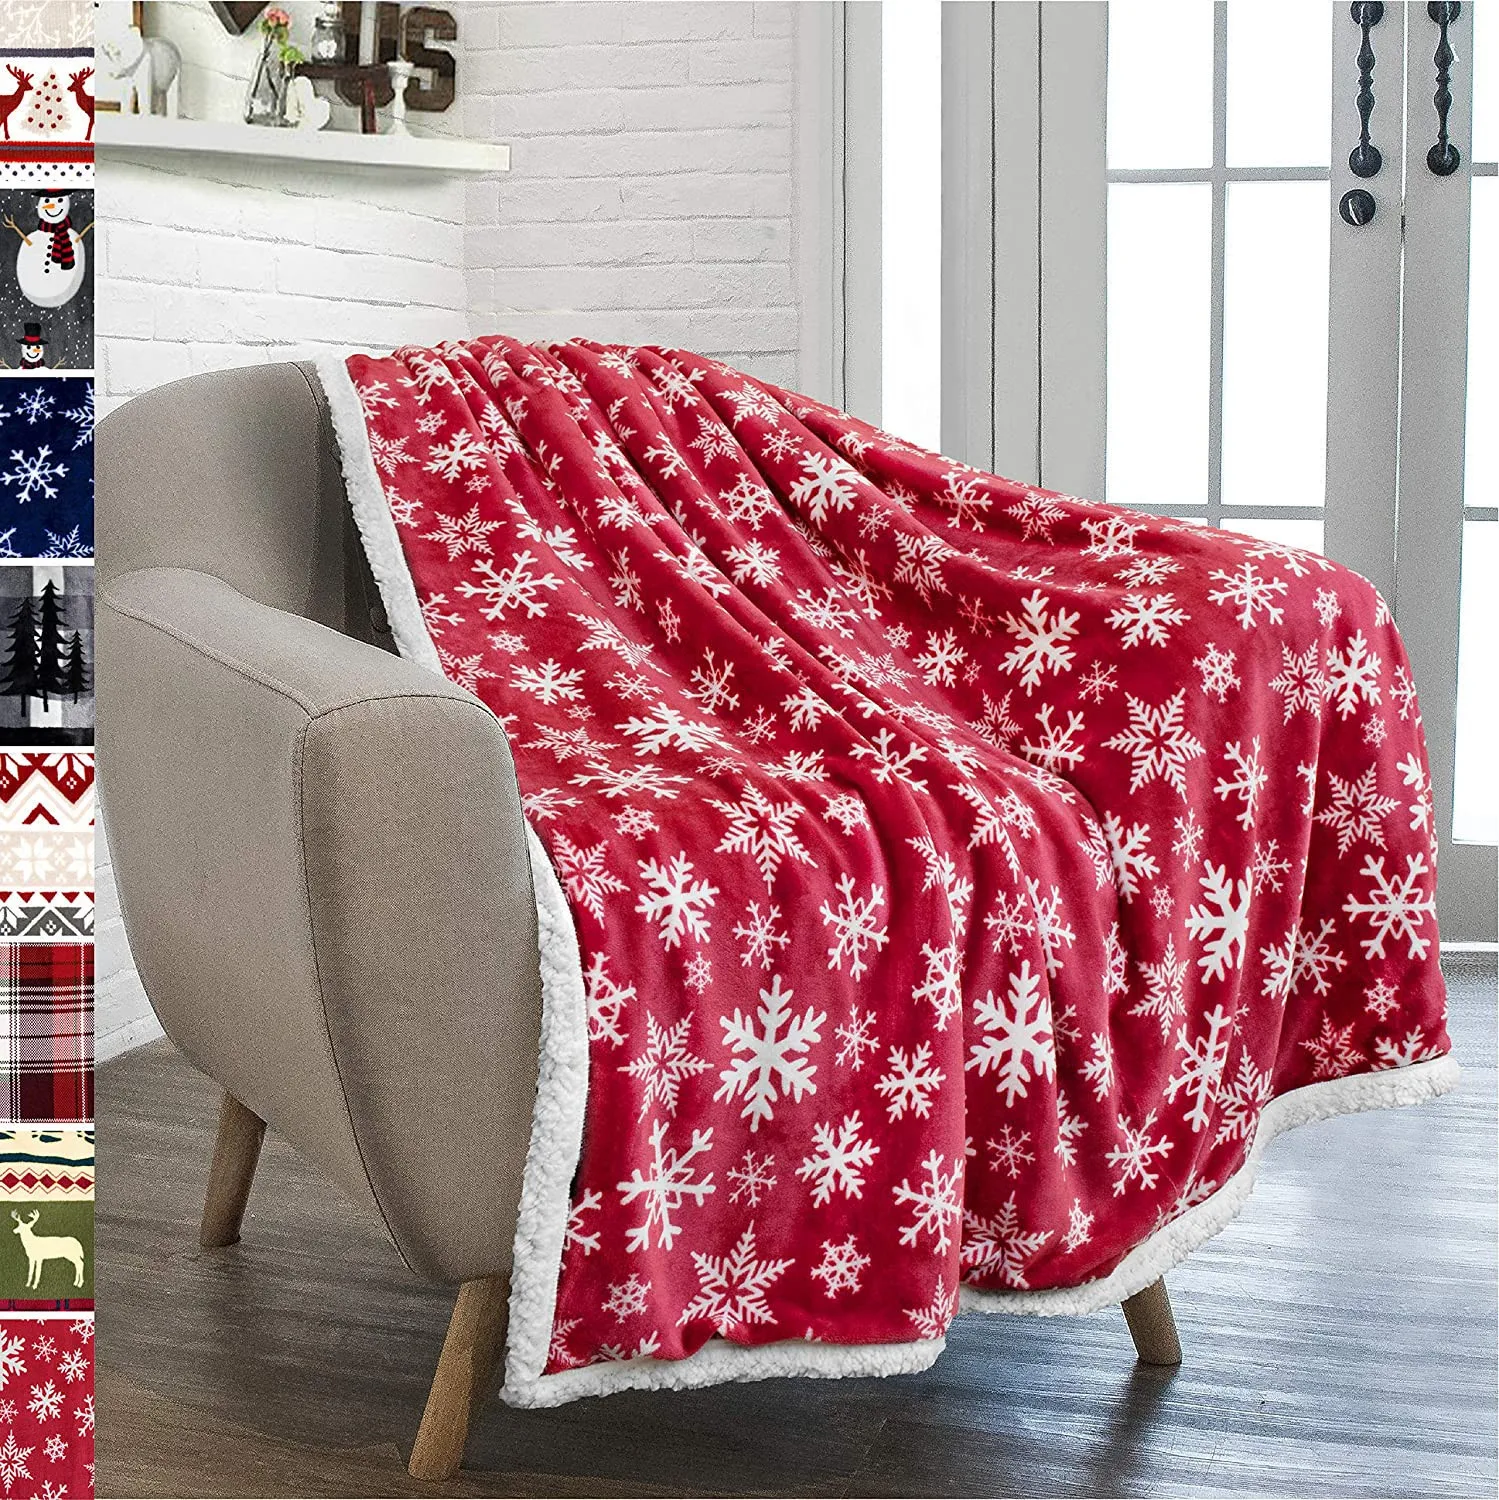 

Cashmere Blankets Manta Sofa/Couch Plane Cozy Double Thicken Lightweight Blanket Velvet Travel Plaids TV Throw Christmas Gift